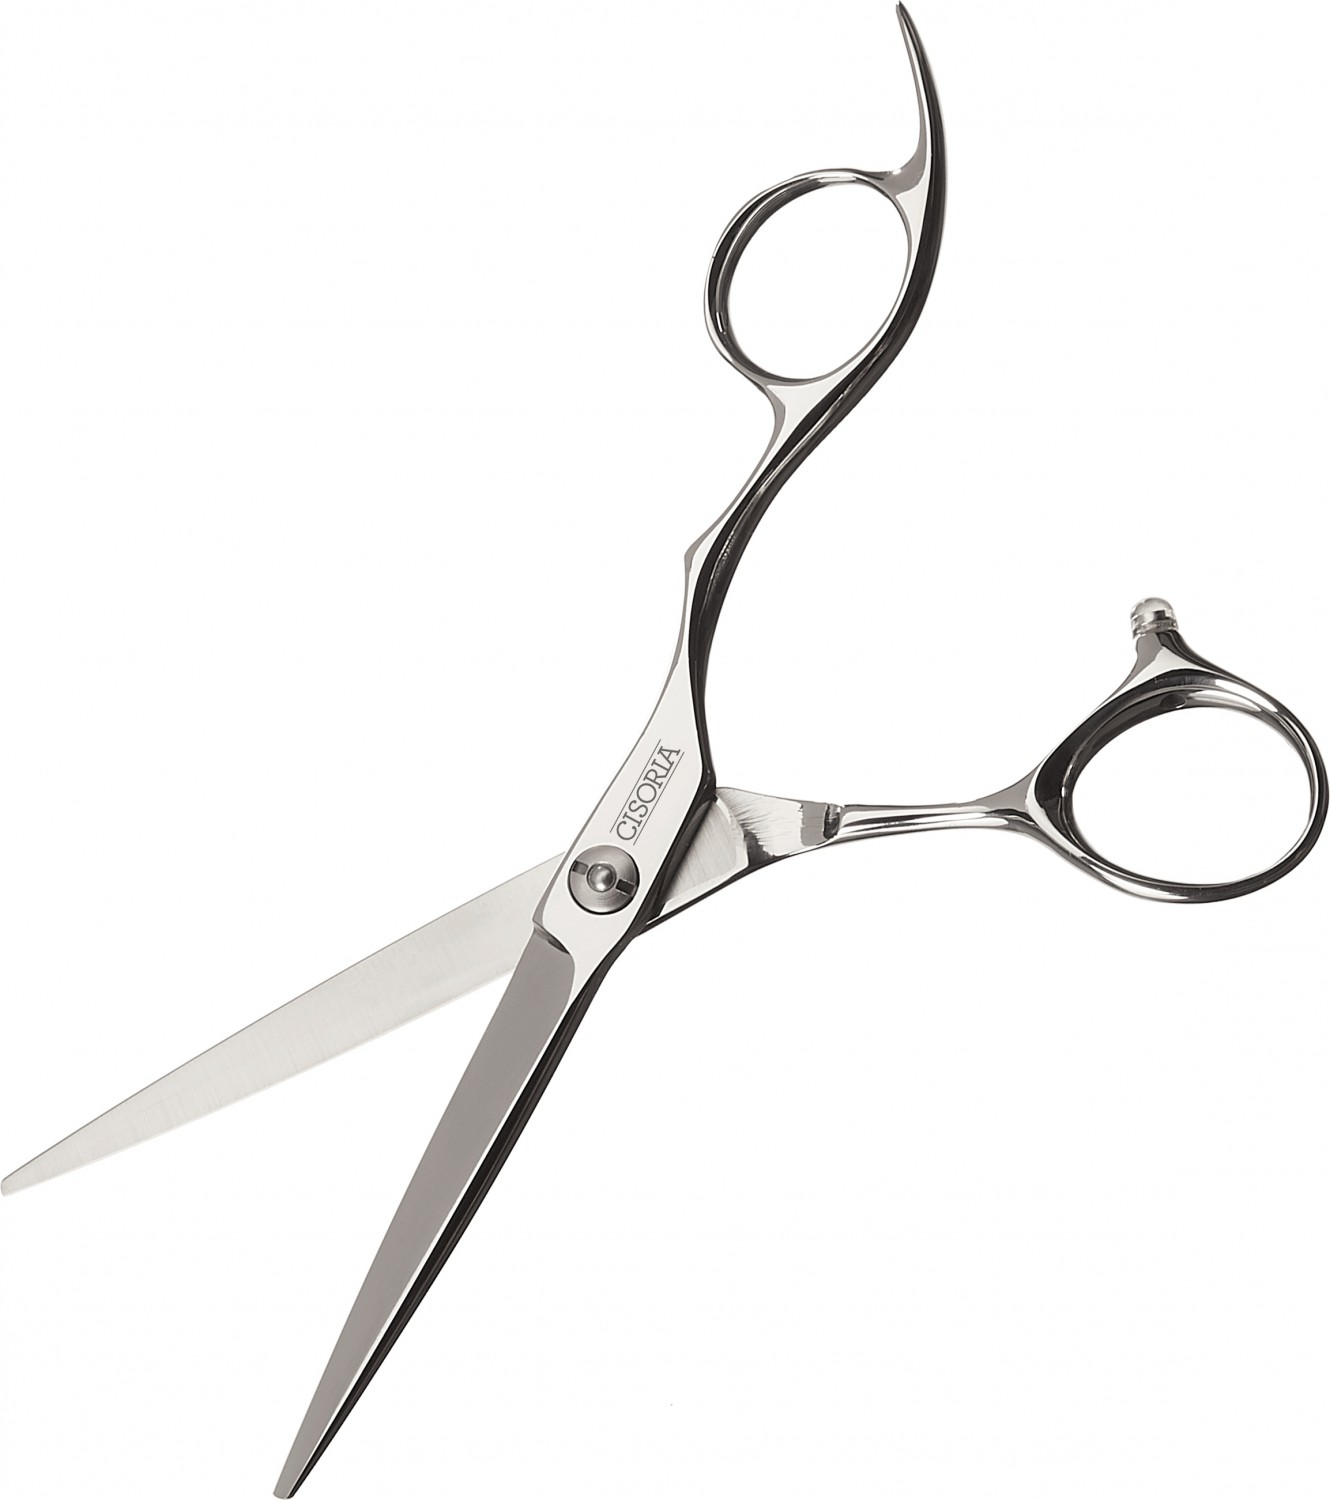  Cisoria Offset Cutting Scissors 6" Serie O600 by Sibel 